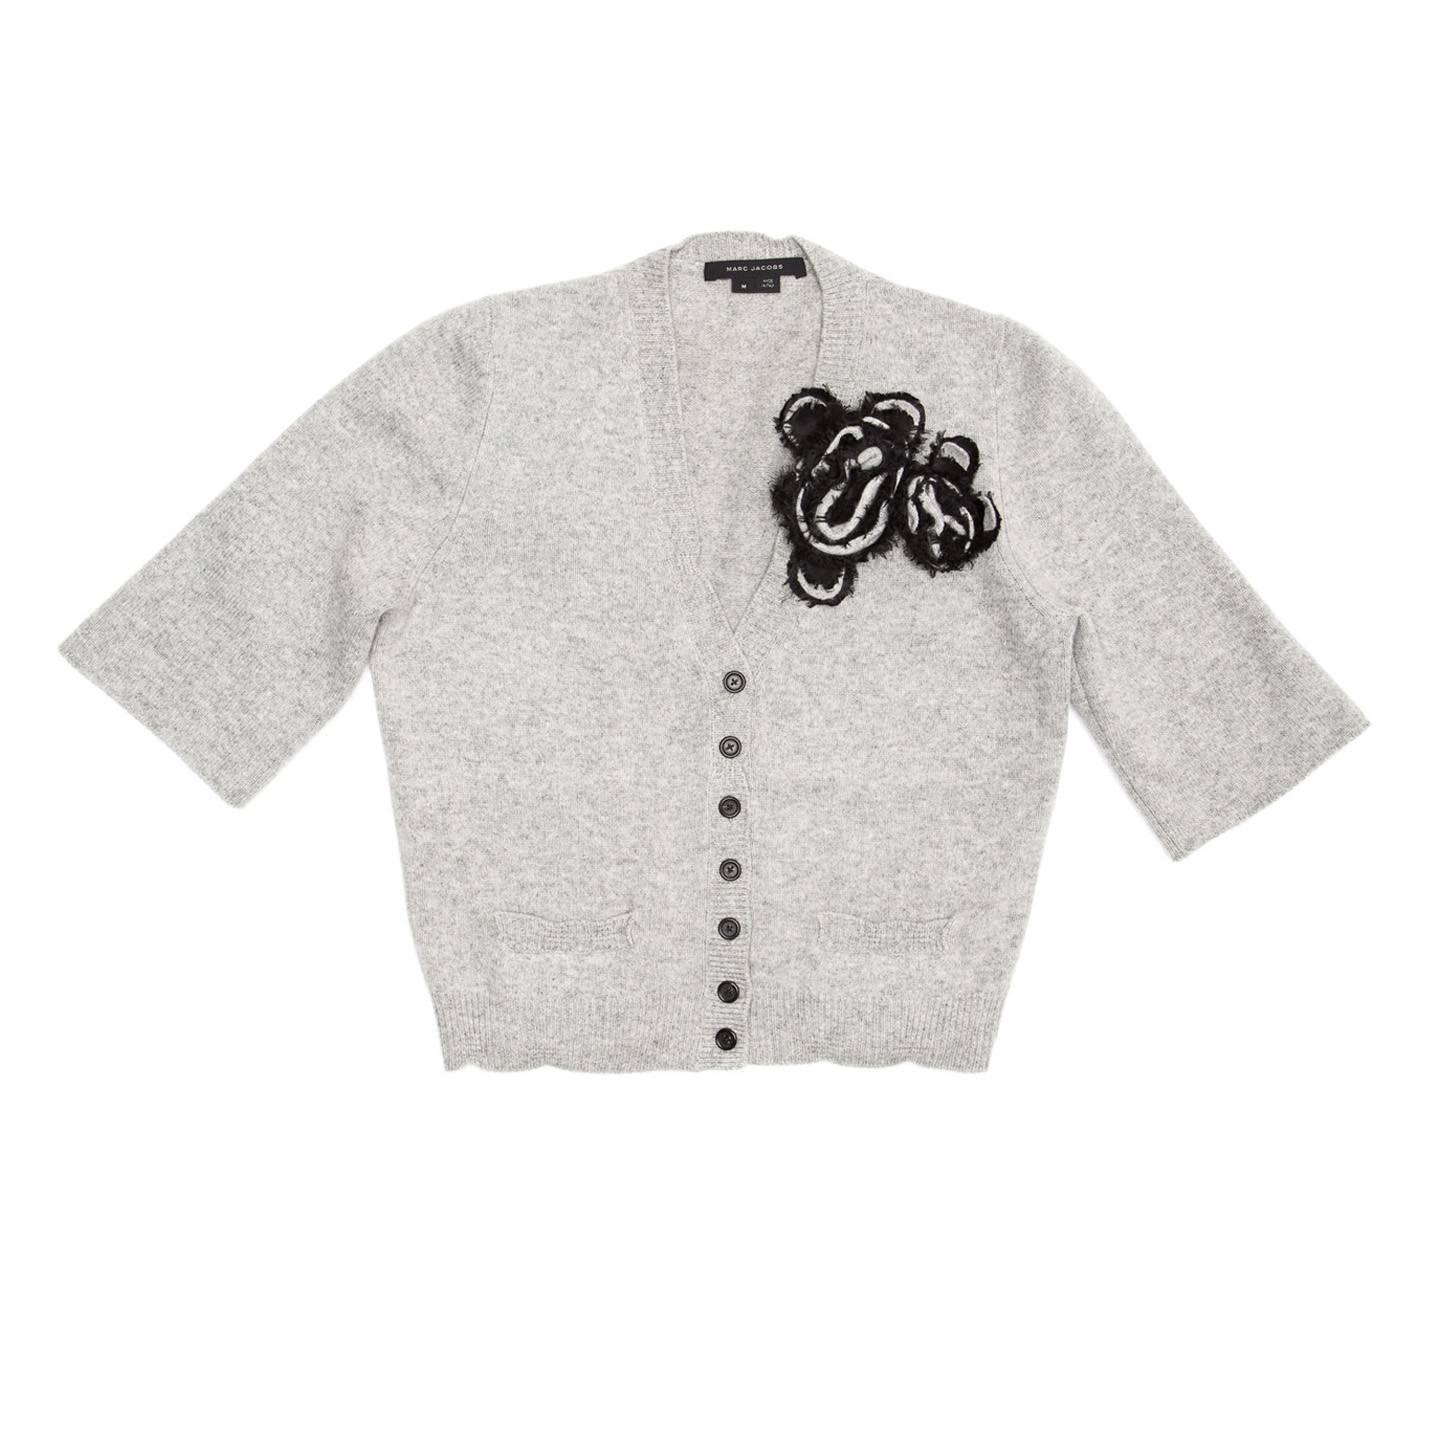 Light grey wool and cashmere knit cardigan with grey and black flower detail on the V-neck. The buttons at front are black to match the flowers, two little slit pockets sit near the hem and the 3/4 length sleeves are cuffless. All the ribbed parts